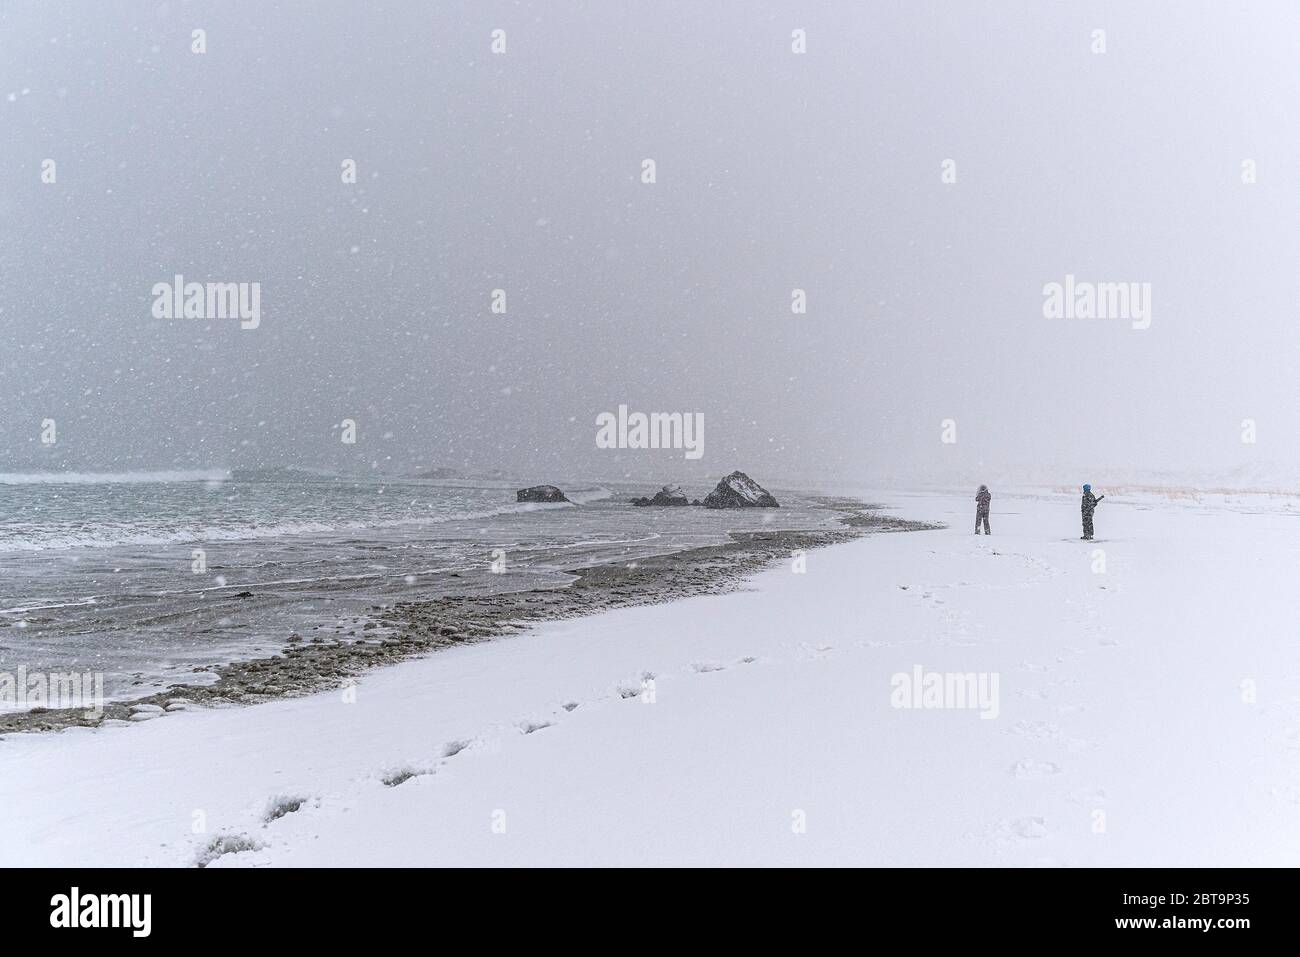 Unrecognizable person photographing a rock on the beach during a windy snowstorm Stock Photo